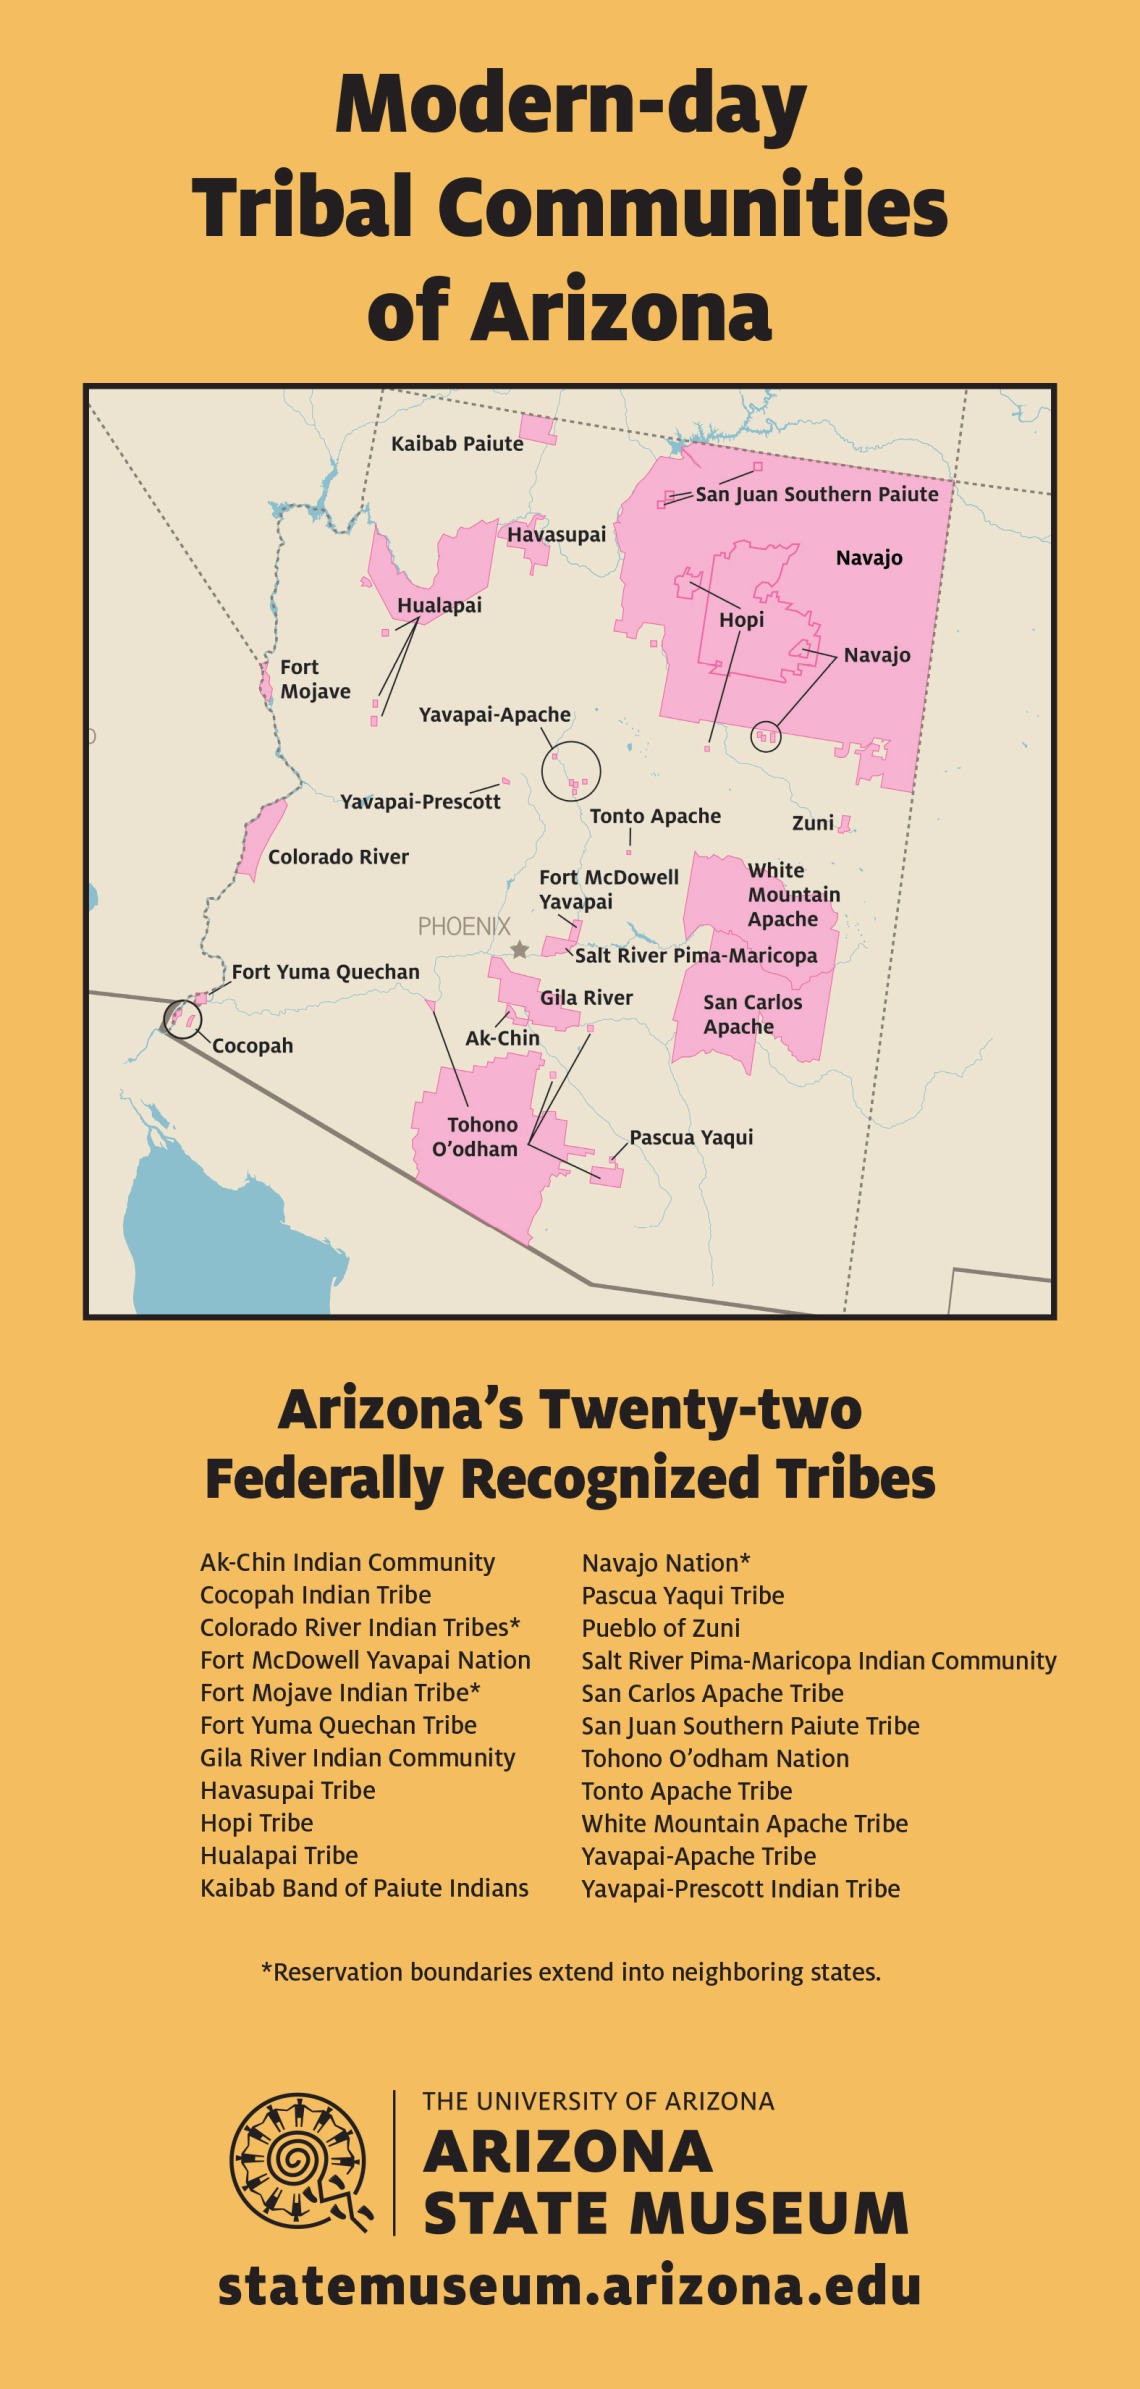 This images shows the modern-day tribal communities of Arizona and lists Arizona's 22 federally recognized tribes.